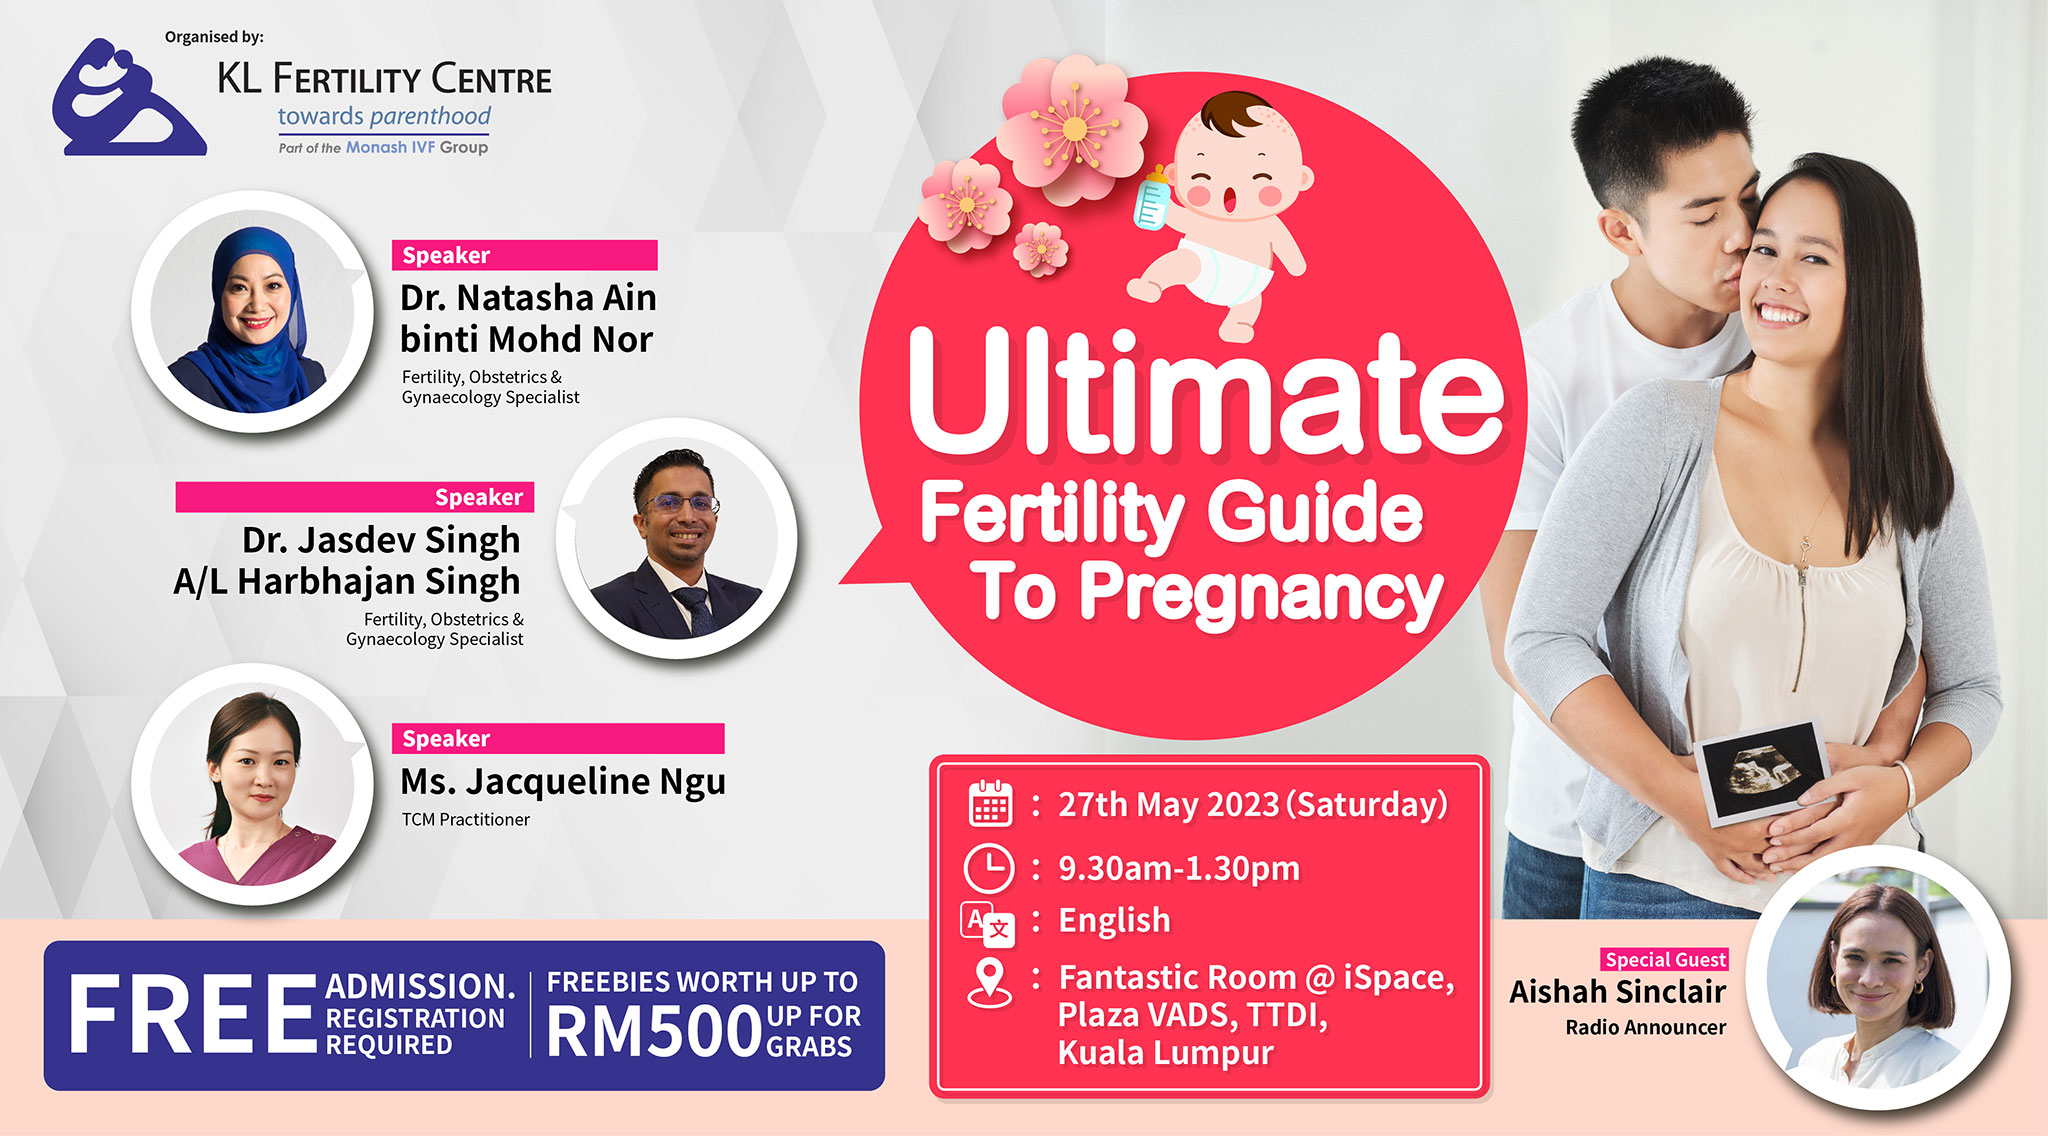 Fertility Forum May 27, 2023 - ULTIMATE FERTILITY GUIDE TO PREGNANCY (ENGLISH)